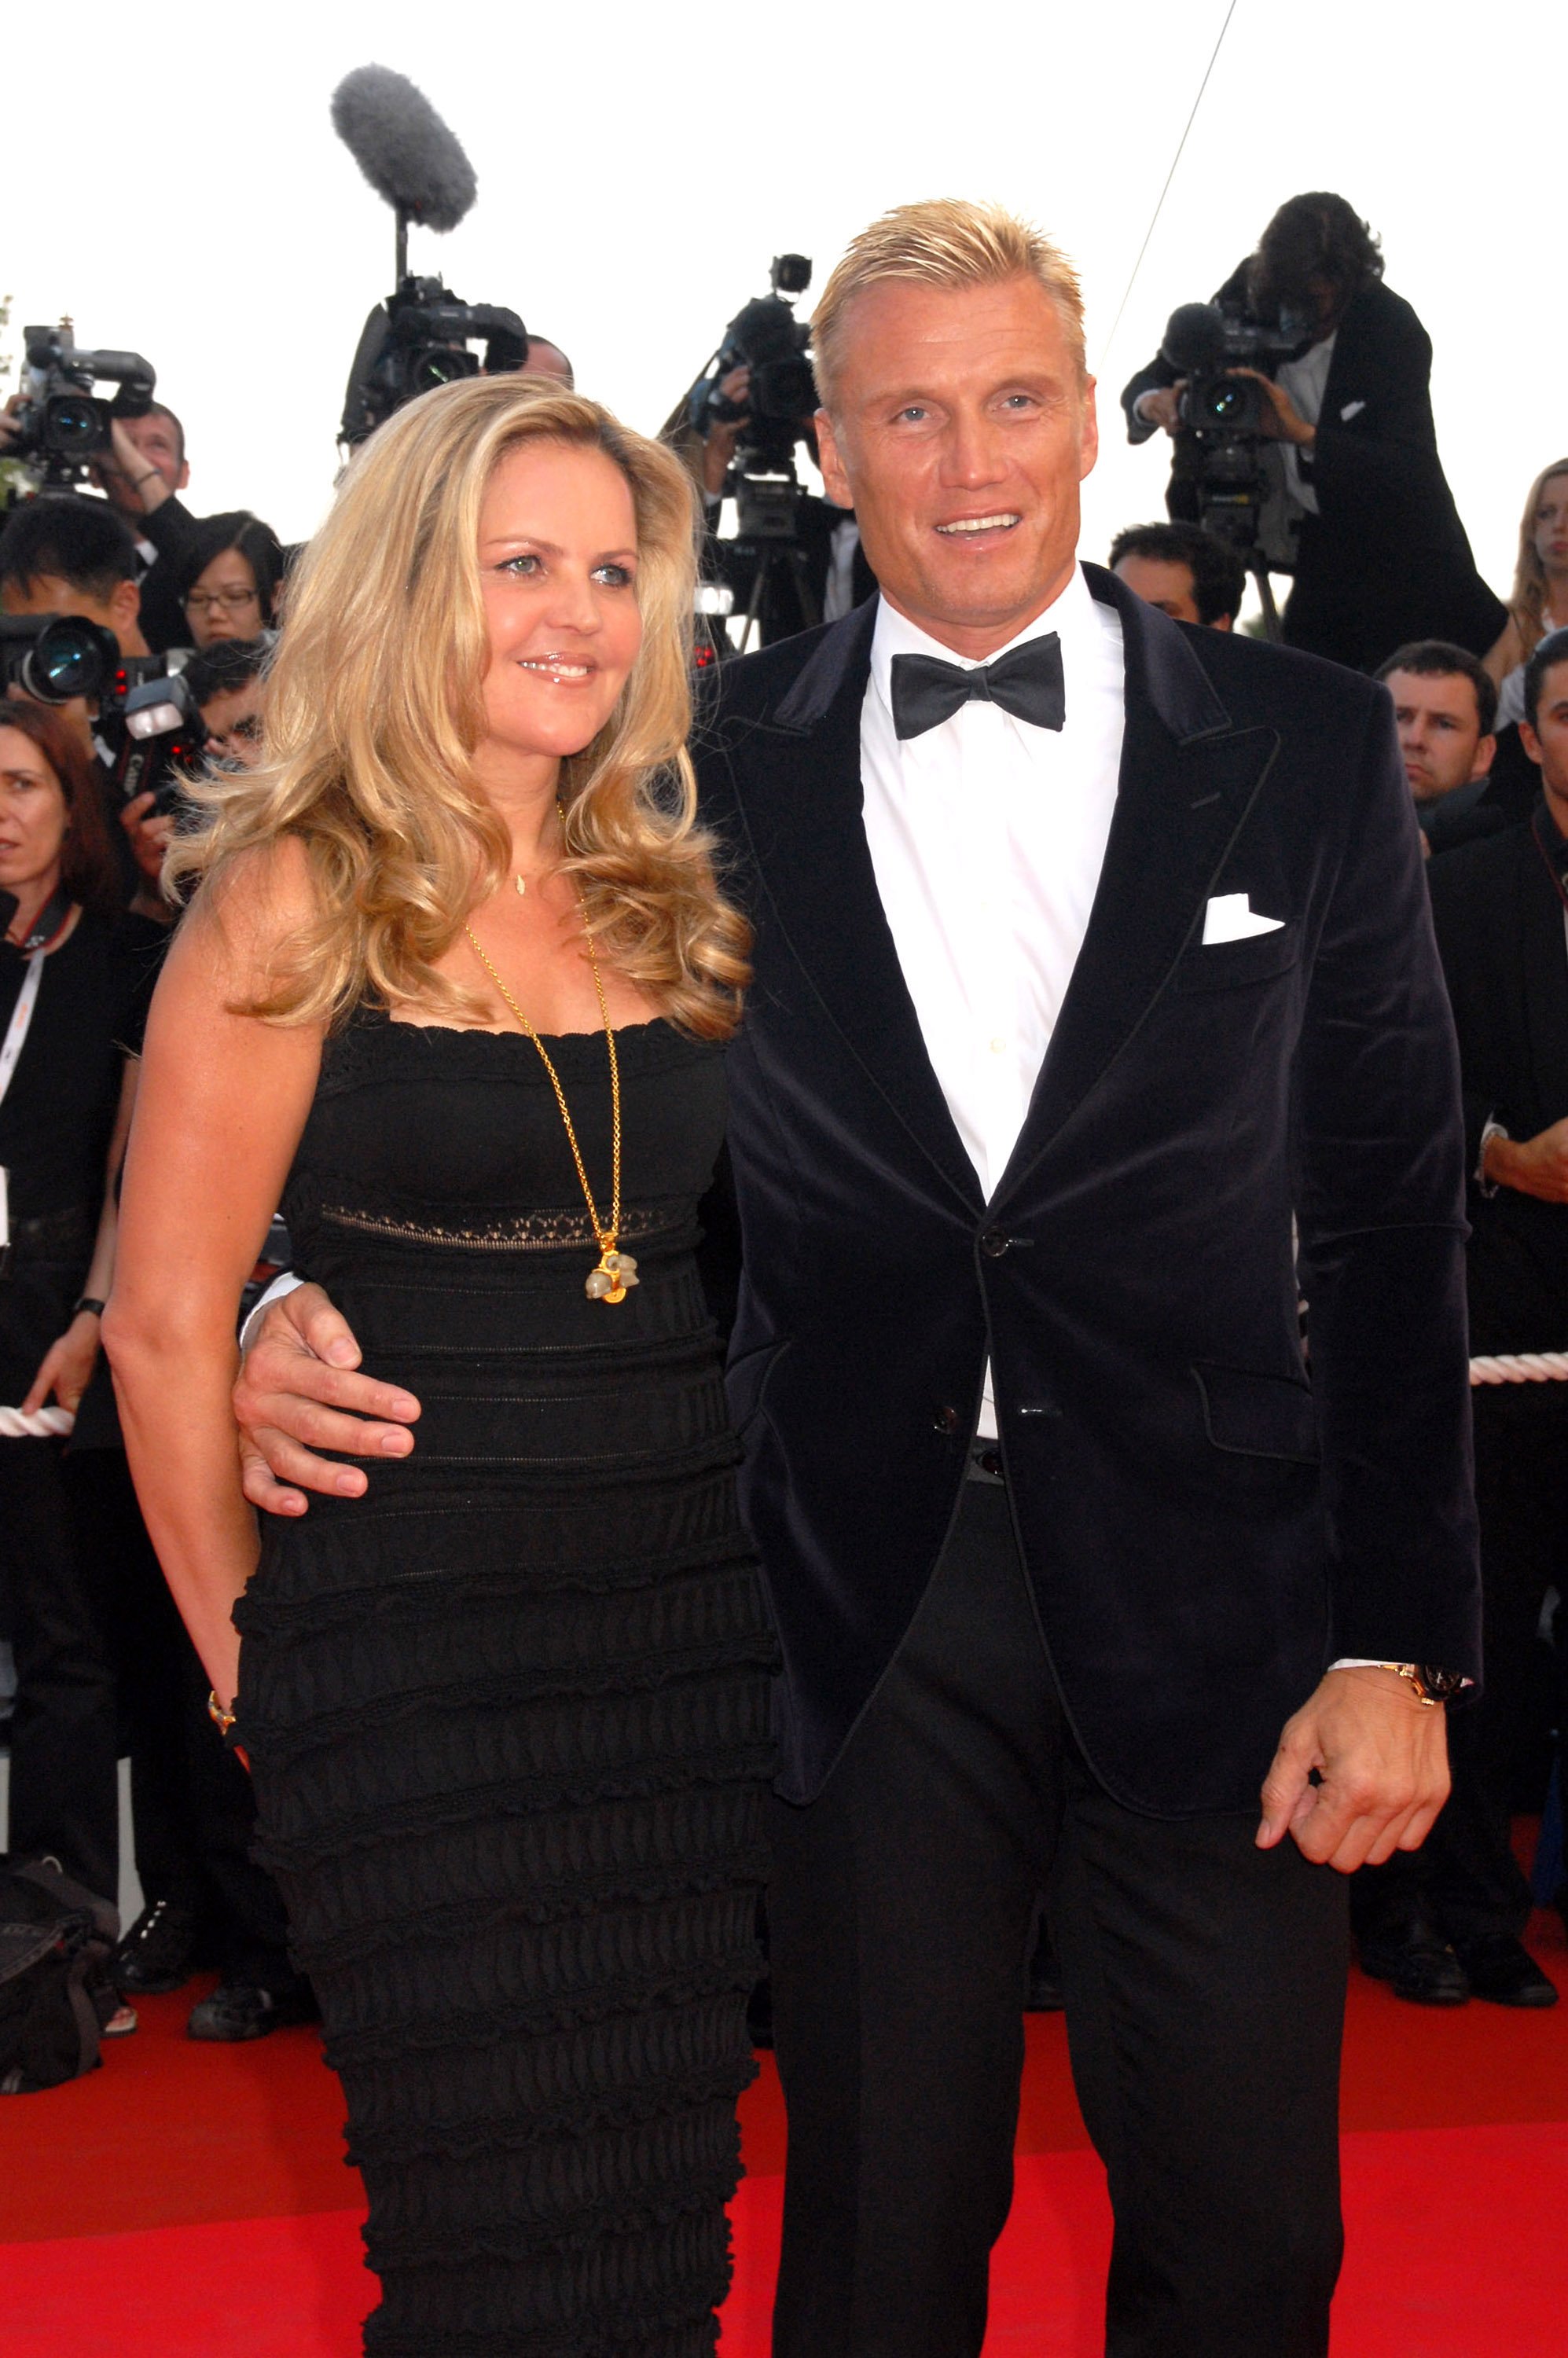 Qviberg — Dolph Lundgren's Exwife Is Also His Good Friend